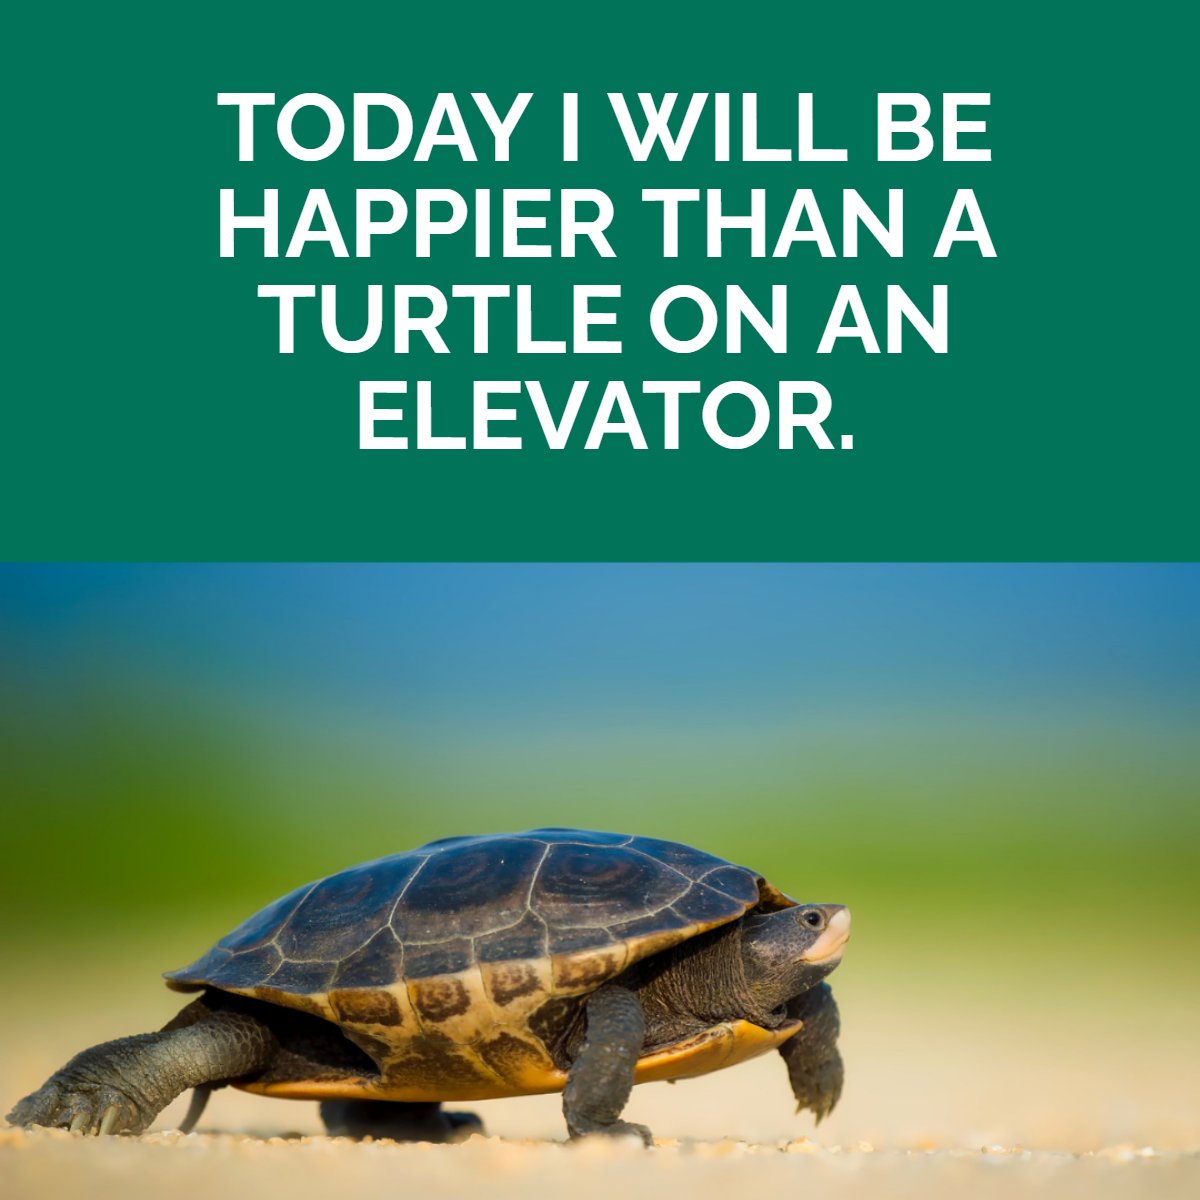 Happier than ever! 🐢😋

#turtlesofinstagram #turtlepower #happierthanever #happy #happyhour #happierme #funnyrealtor
 #chadwickknight #realtor #realestate #floridarealtor #floridarealestate #mvprealty #realestateadvisor #homesforsale #property #forsale #newhome